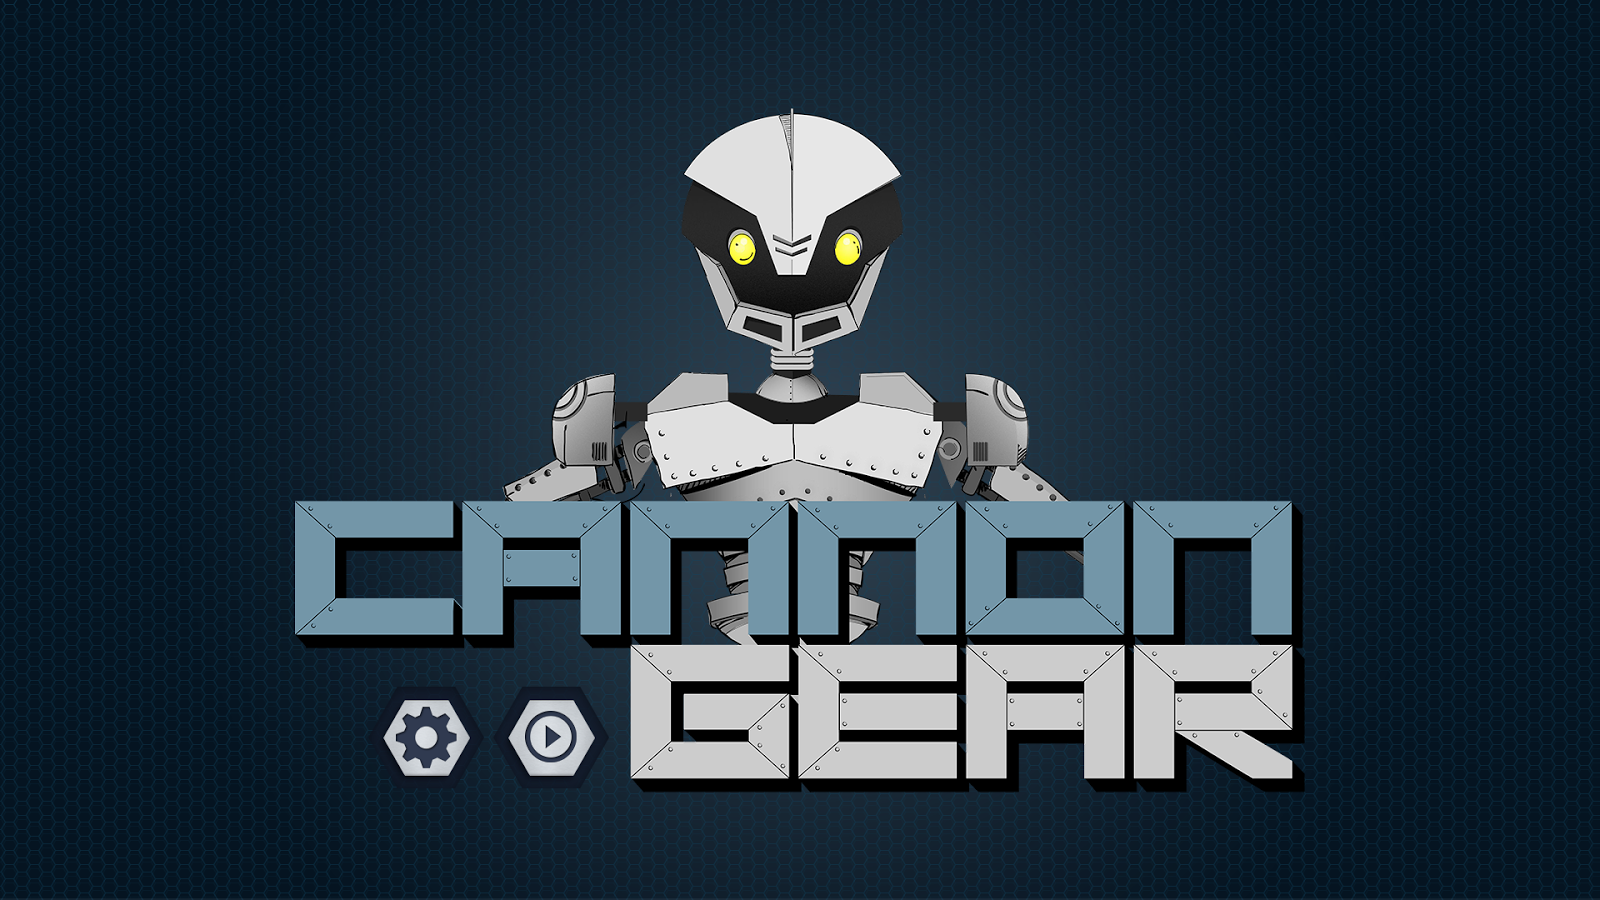 Cannon Gear game